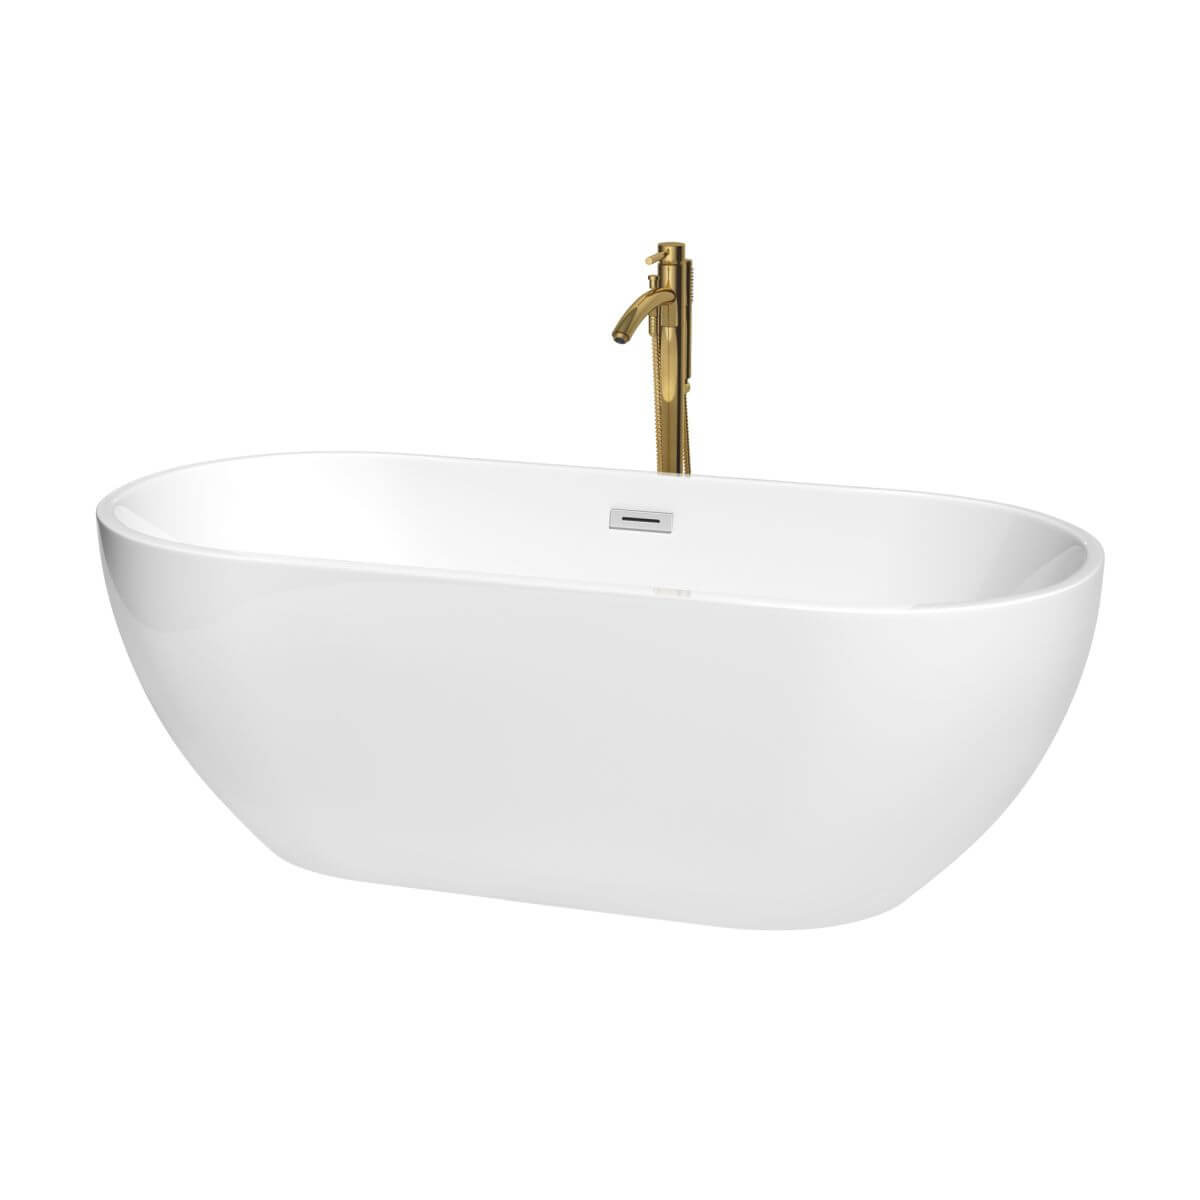 Wyndham Collection Brooklyn 67 inch Freestanding Bathtub in White with Polished Chrome Trim and Floor Mounted Faucet in Brushed Gold - WCOBT200067PCATPGD